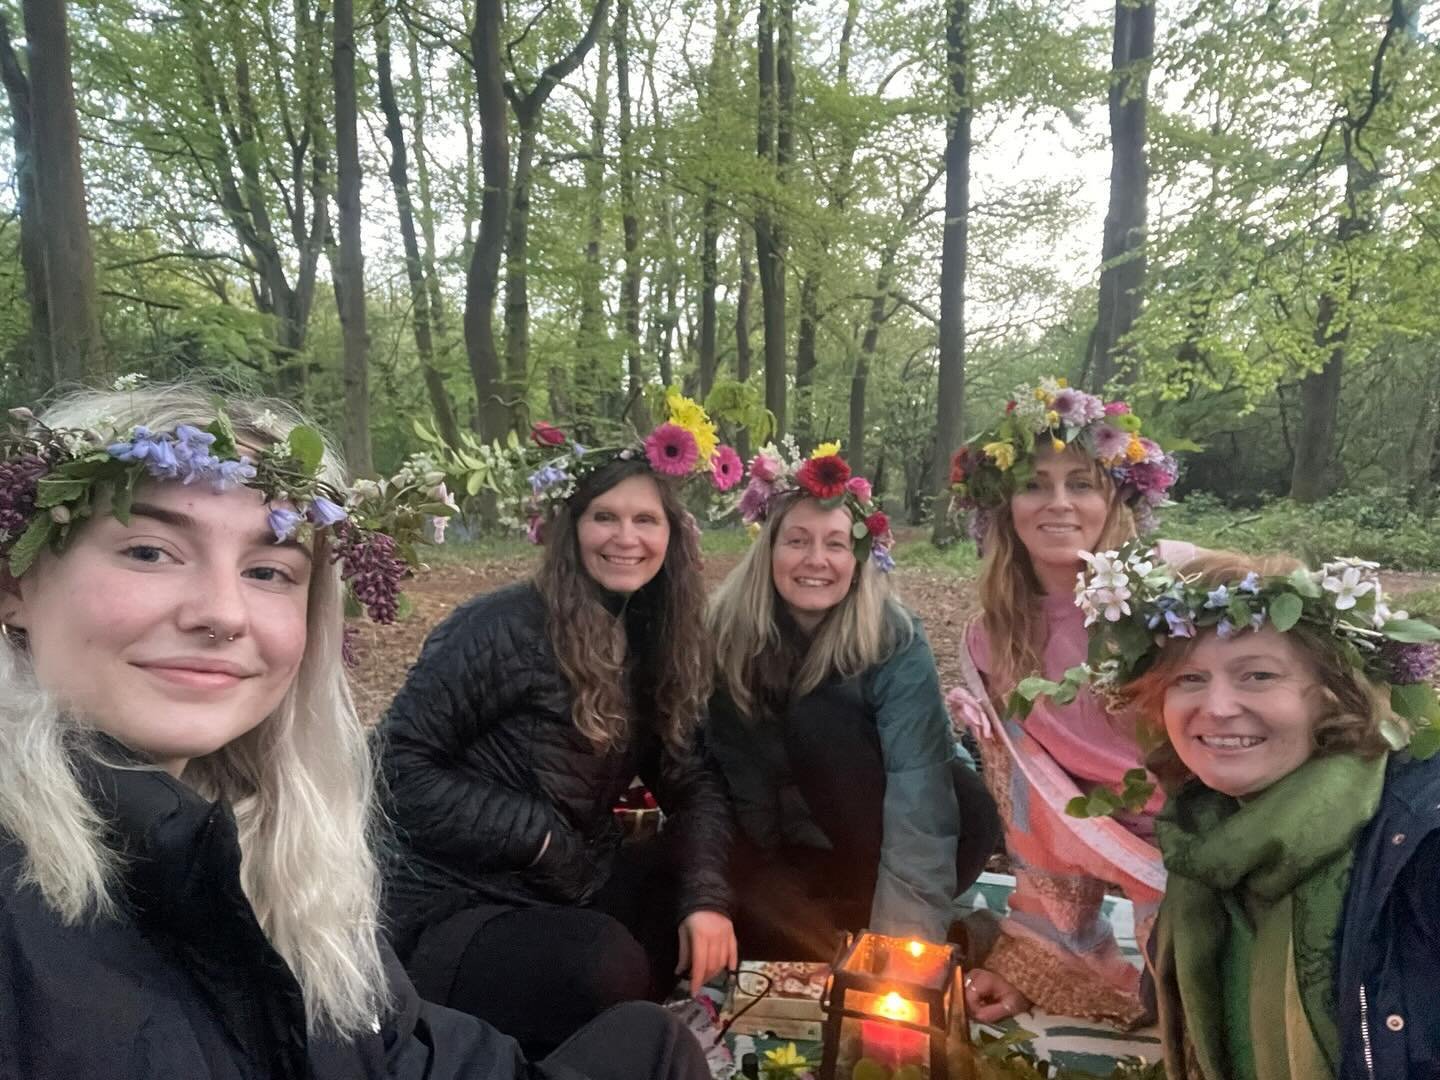 🔥 BELTANE BLESSINGS TO ALL 

The ancient Gaelic Celtic cross quarter fire festival, Beltane is celebrated this week, many gatherings beginning today as over time it has come to merge with the May Day festival ( but is actually much, much older than 